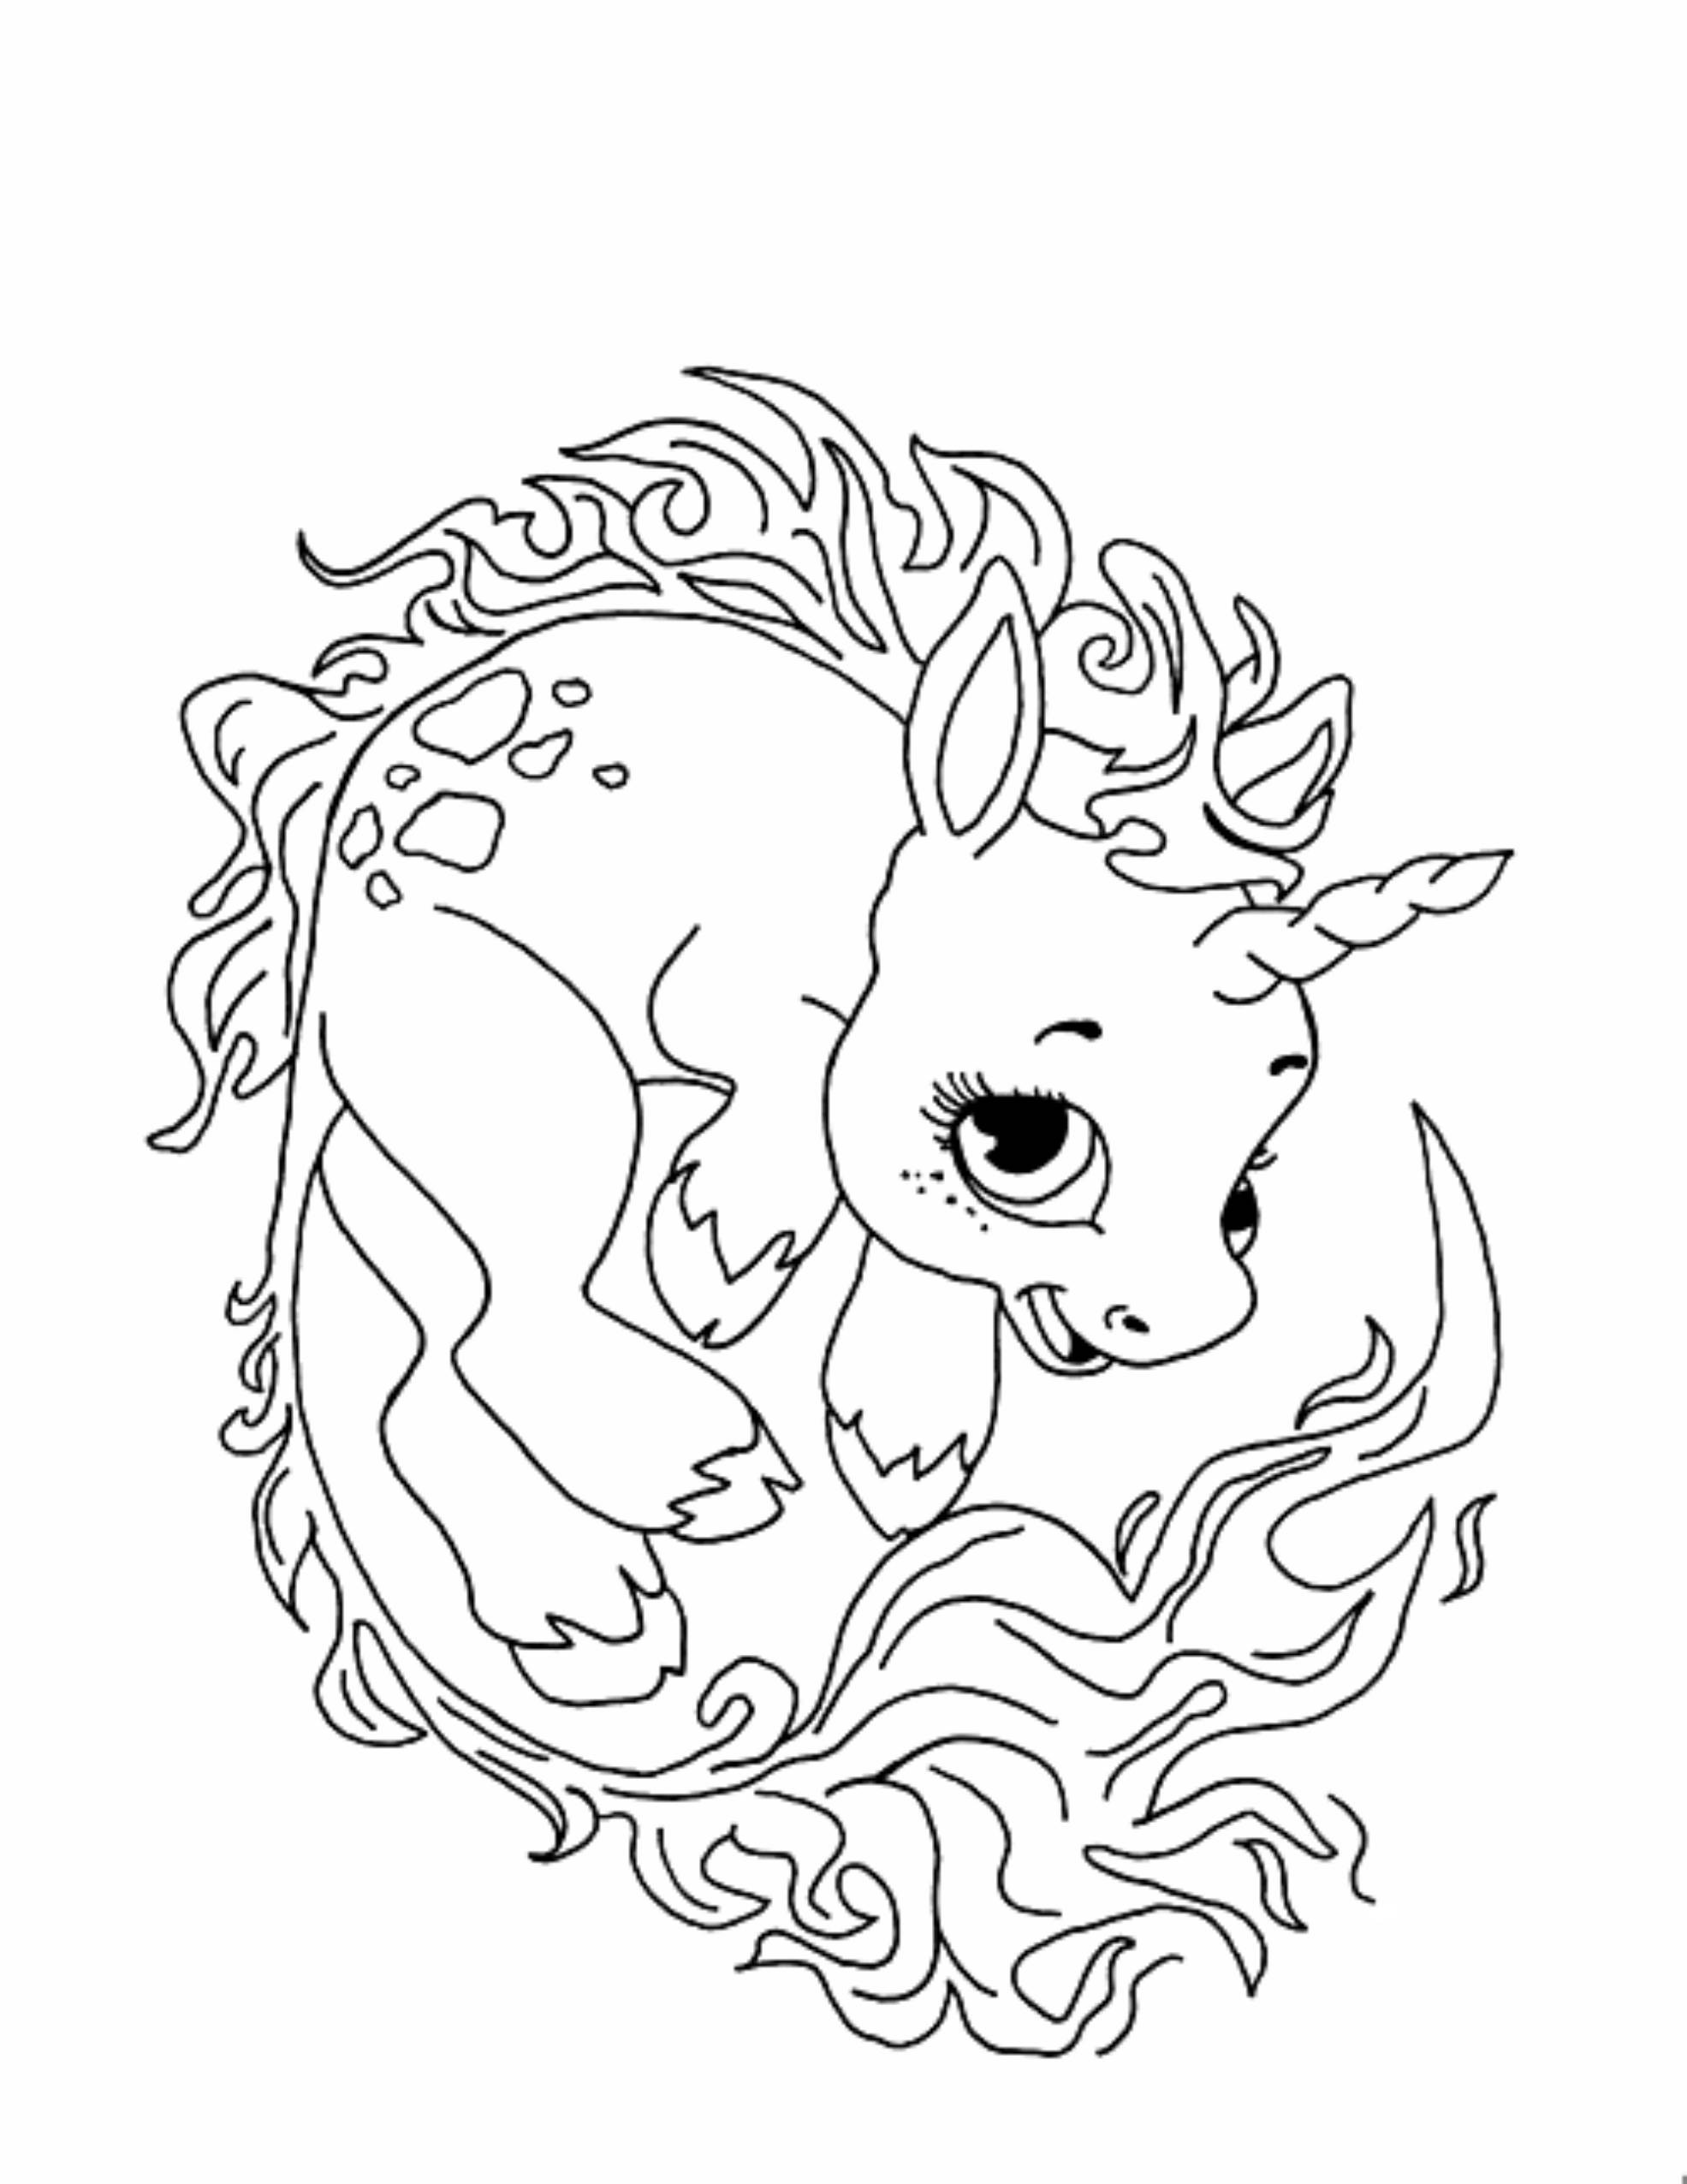 Girl Unicorn Coloring Pages
 Print & Download Unicorn Coloring Pages for Children